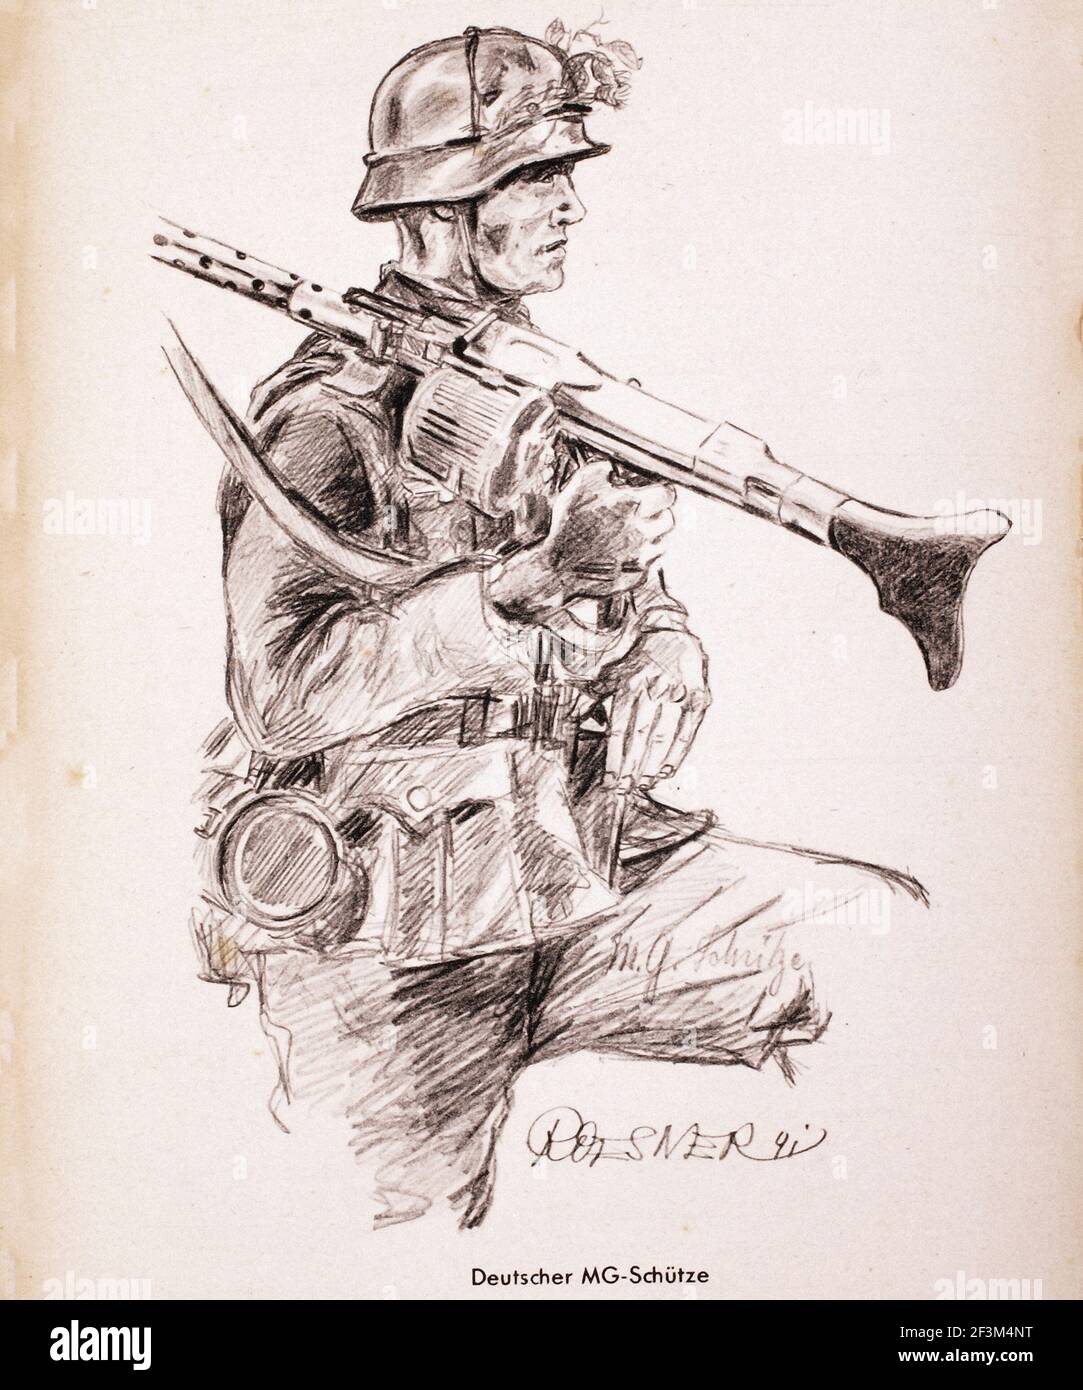 World War II sketches by German artists. German machine gunner in Russian campaign (Eastern Front).  USSR, 1940s Stock Photo